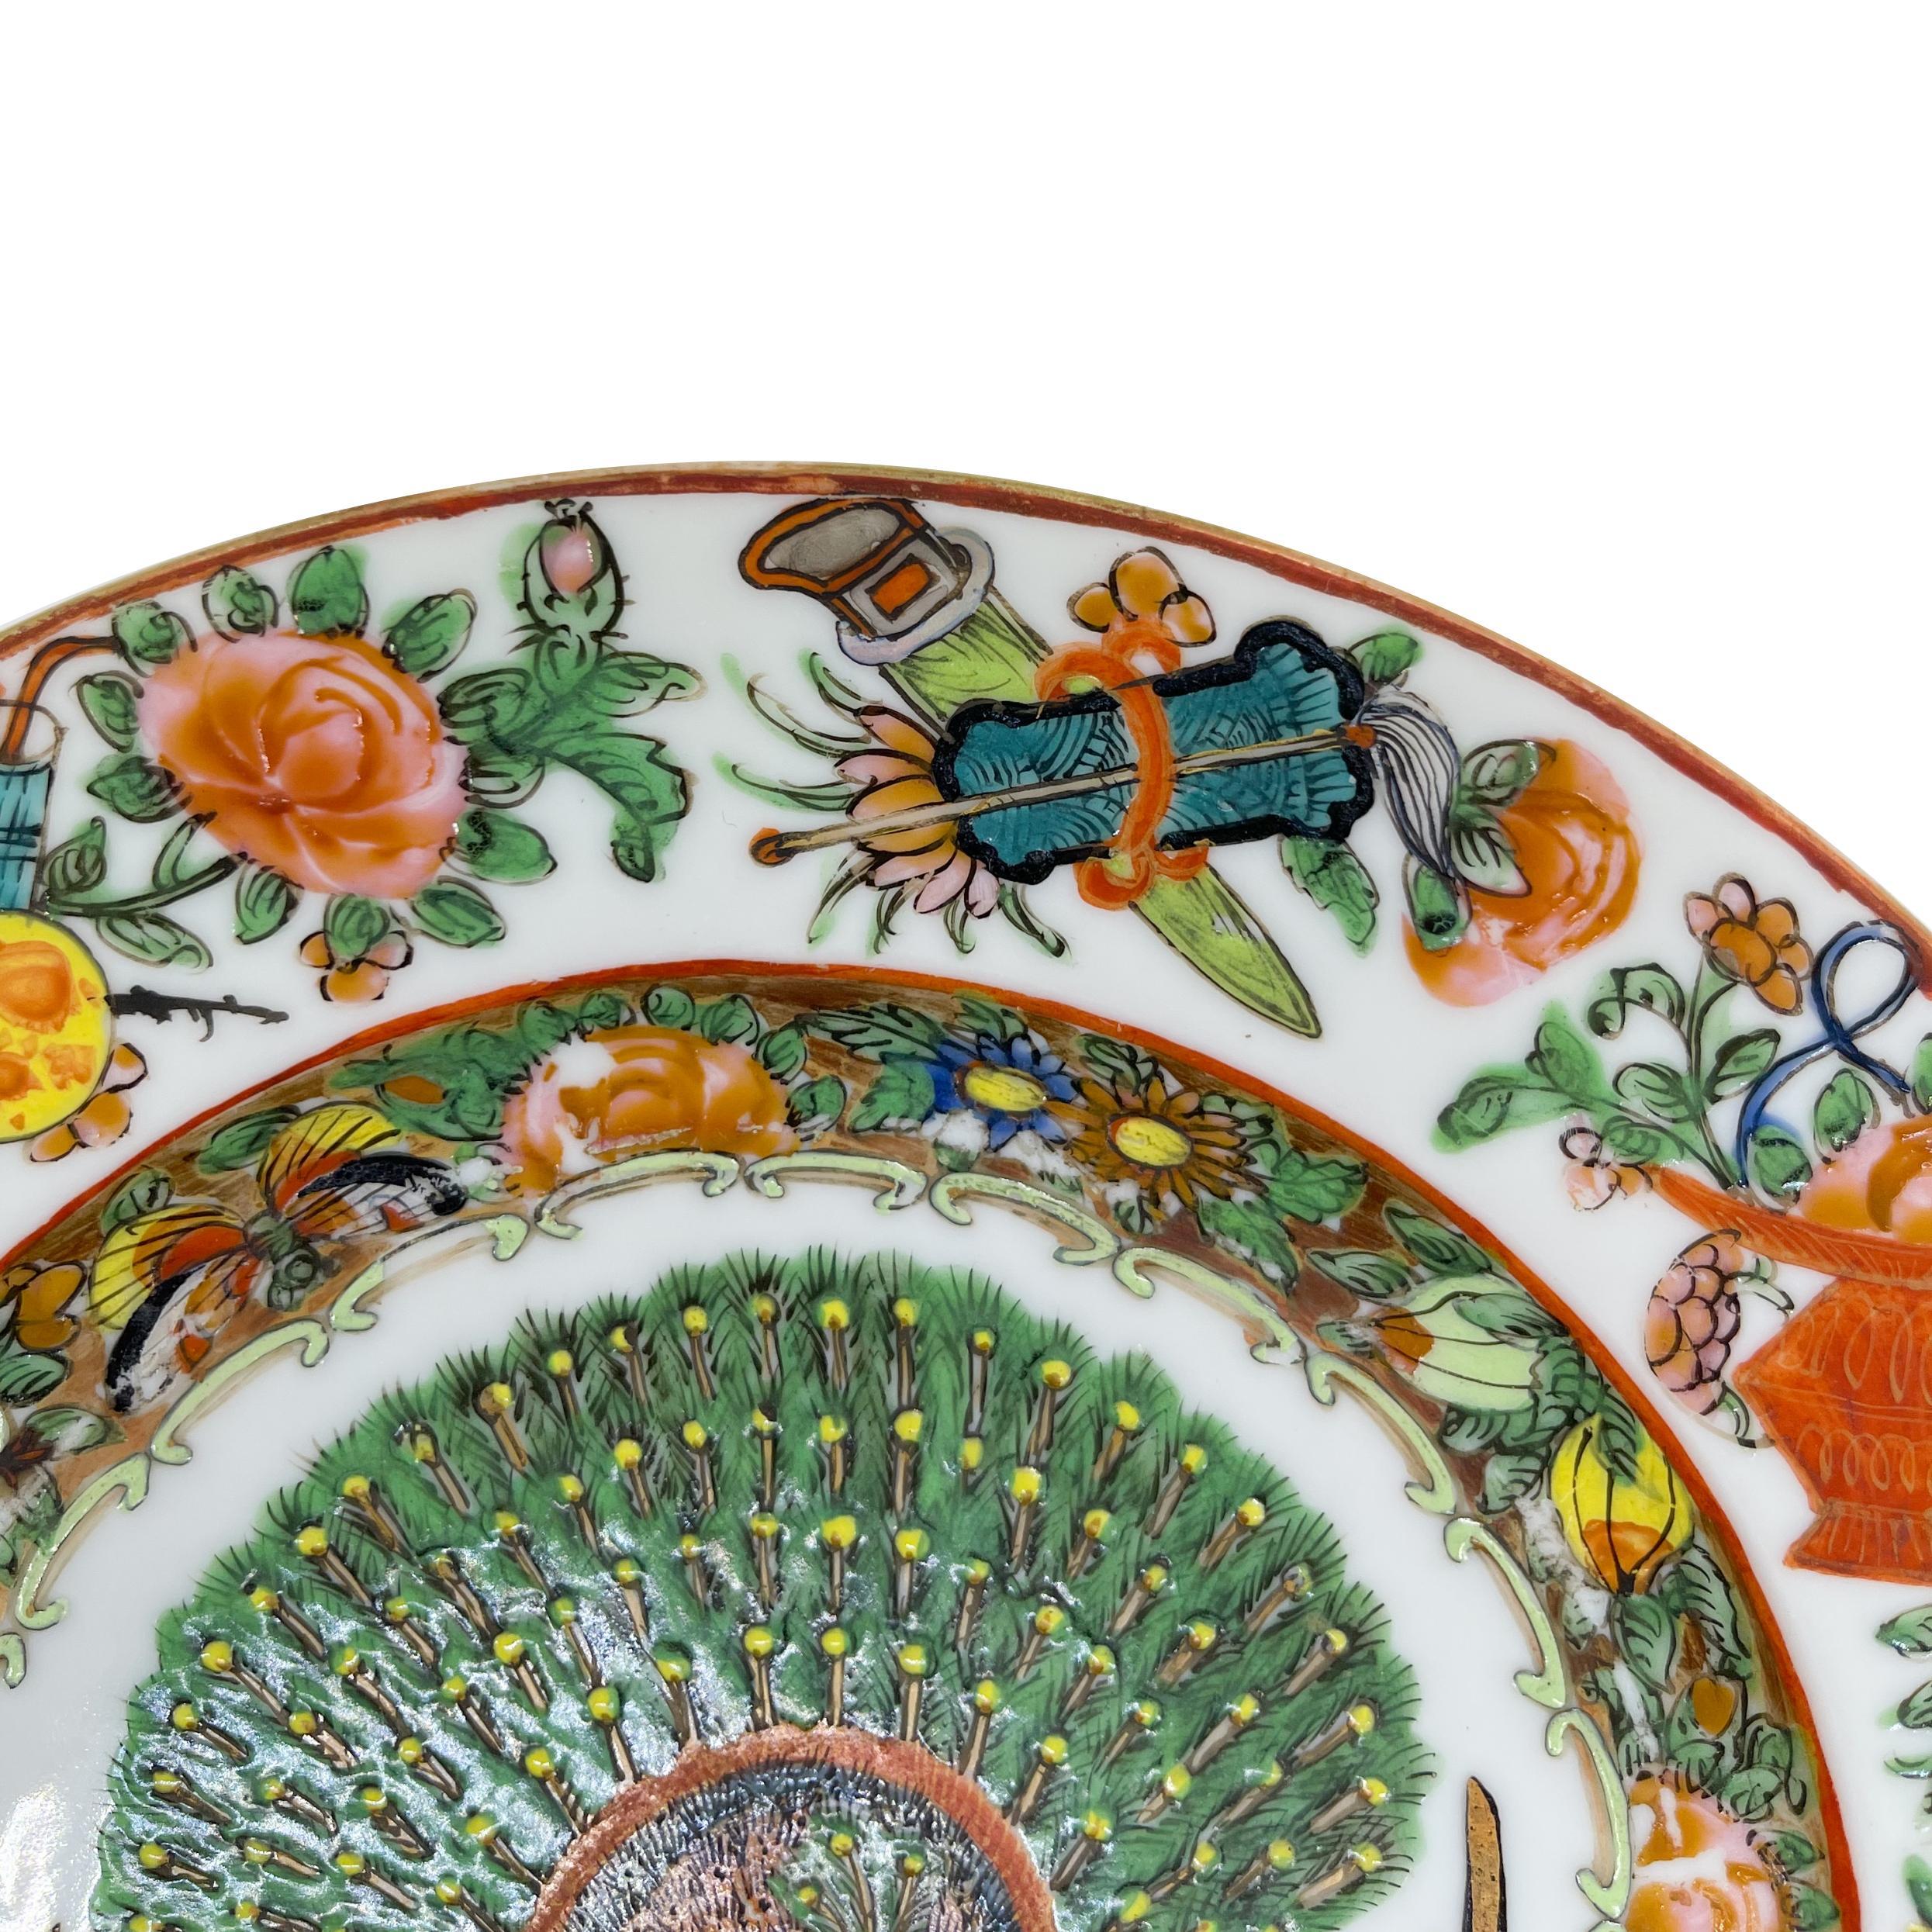 Canton Famille Rose Plate, Qing Dynasty, Tongzhi Era, ca. 1865. 
The Central Roundel with a Polychrome Enameled Full Displaying Peacock, with an inner border to the cavetto of an all-over fruit and floral pattern with two butterflies on a gilded